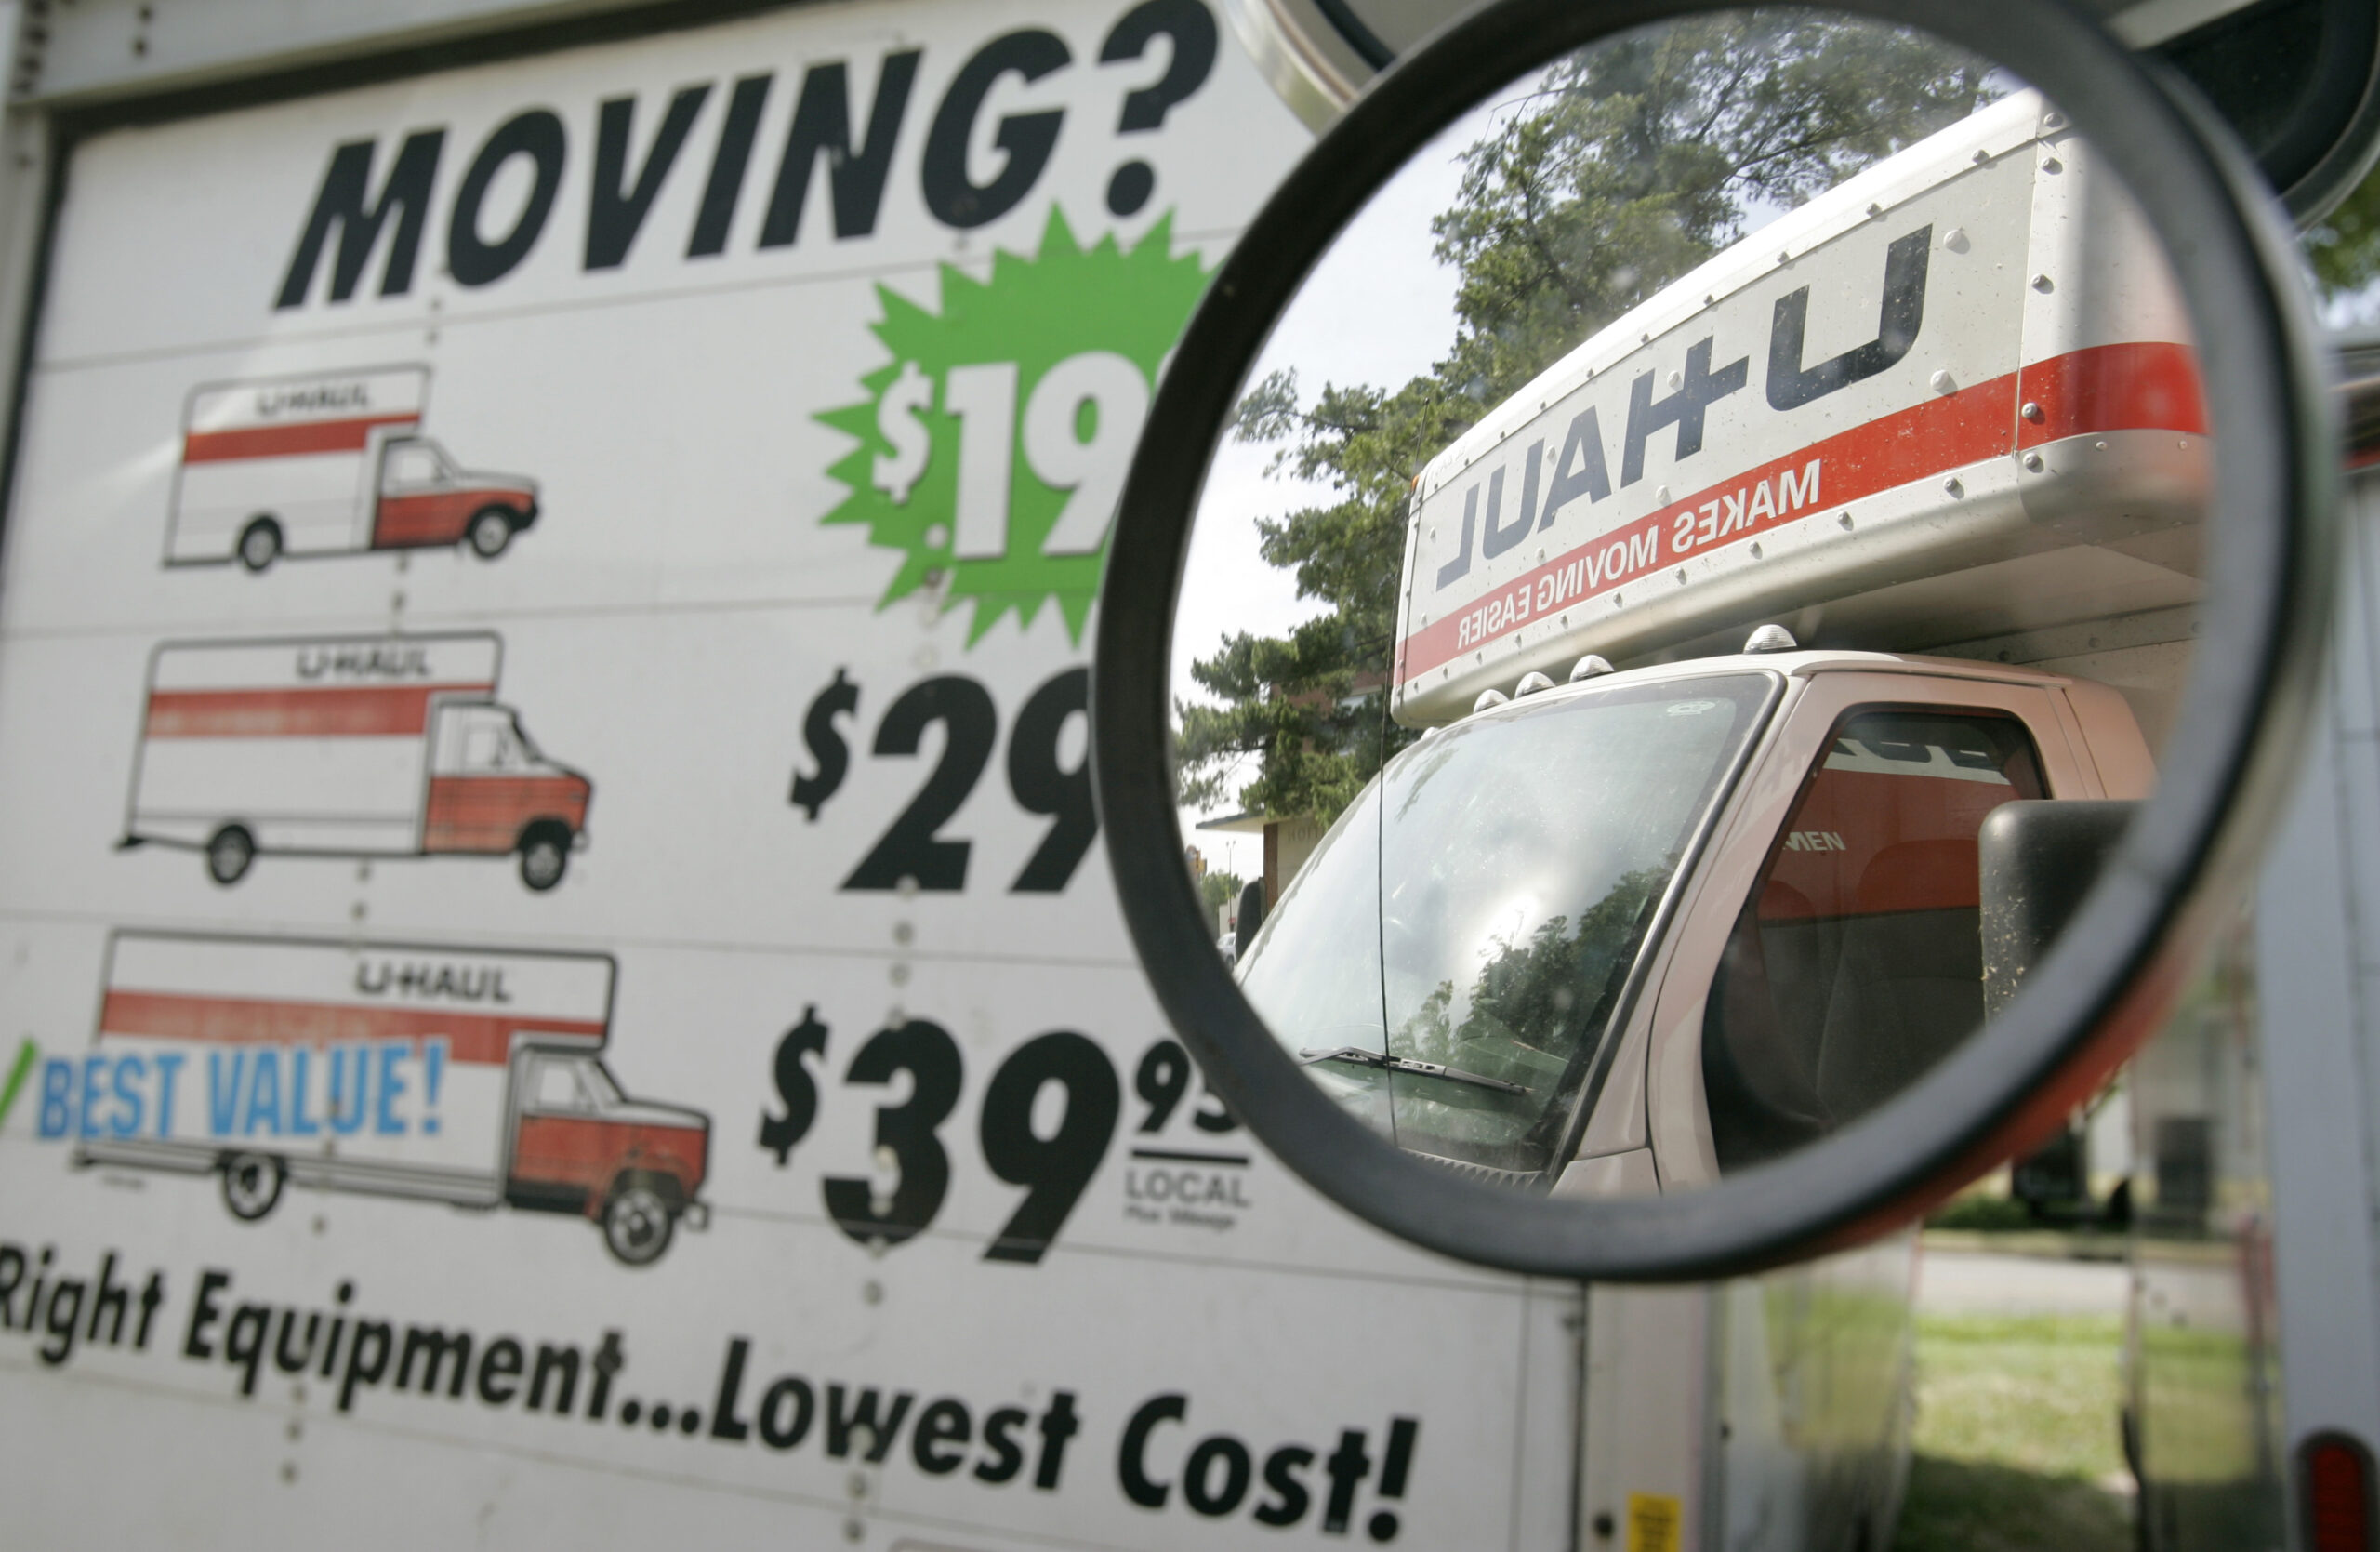 U-Haul truck seen in the side mirror of a another truck